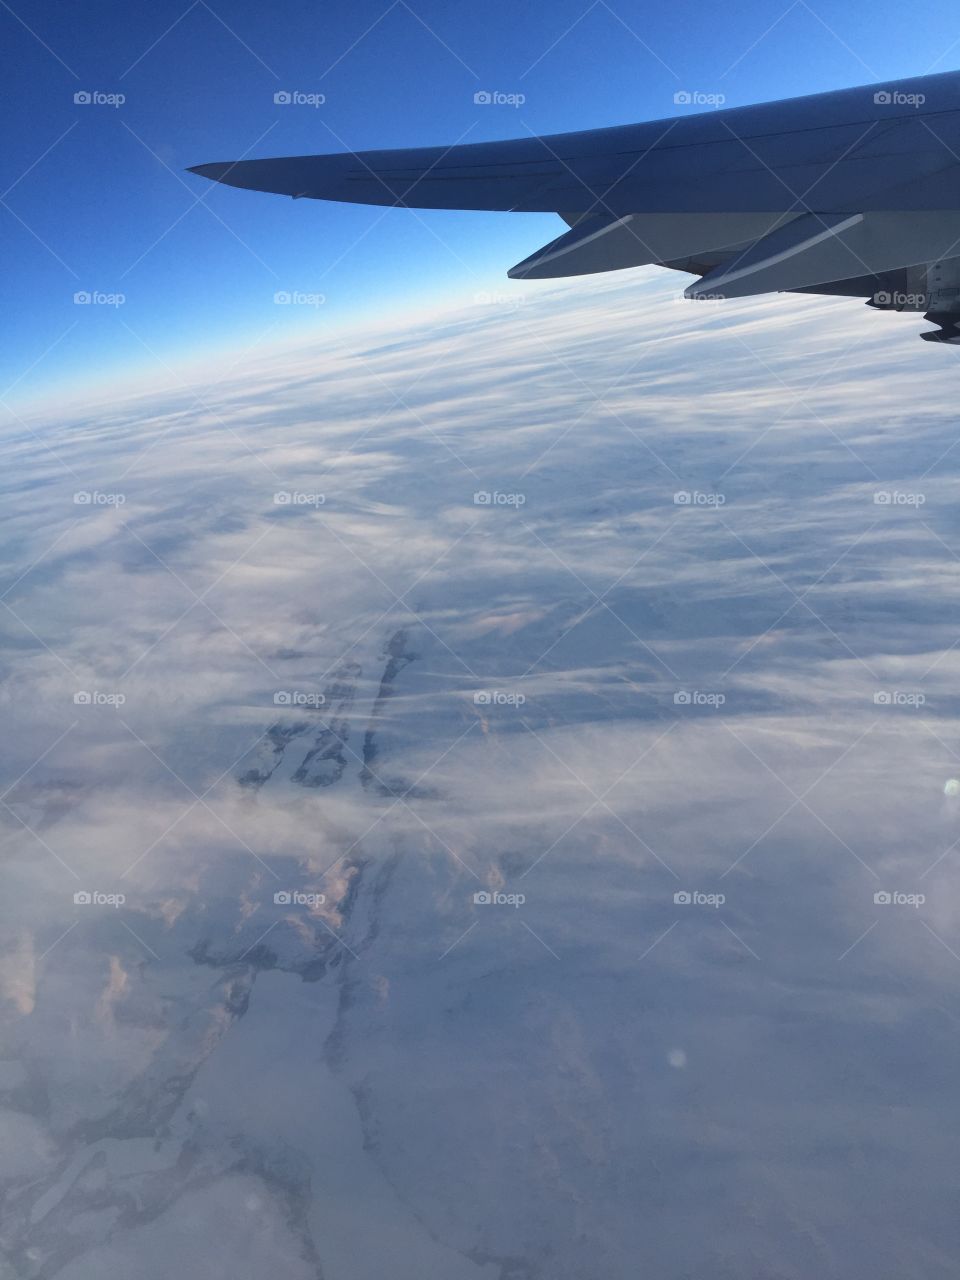 The view of the north pole